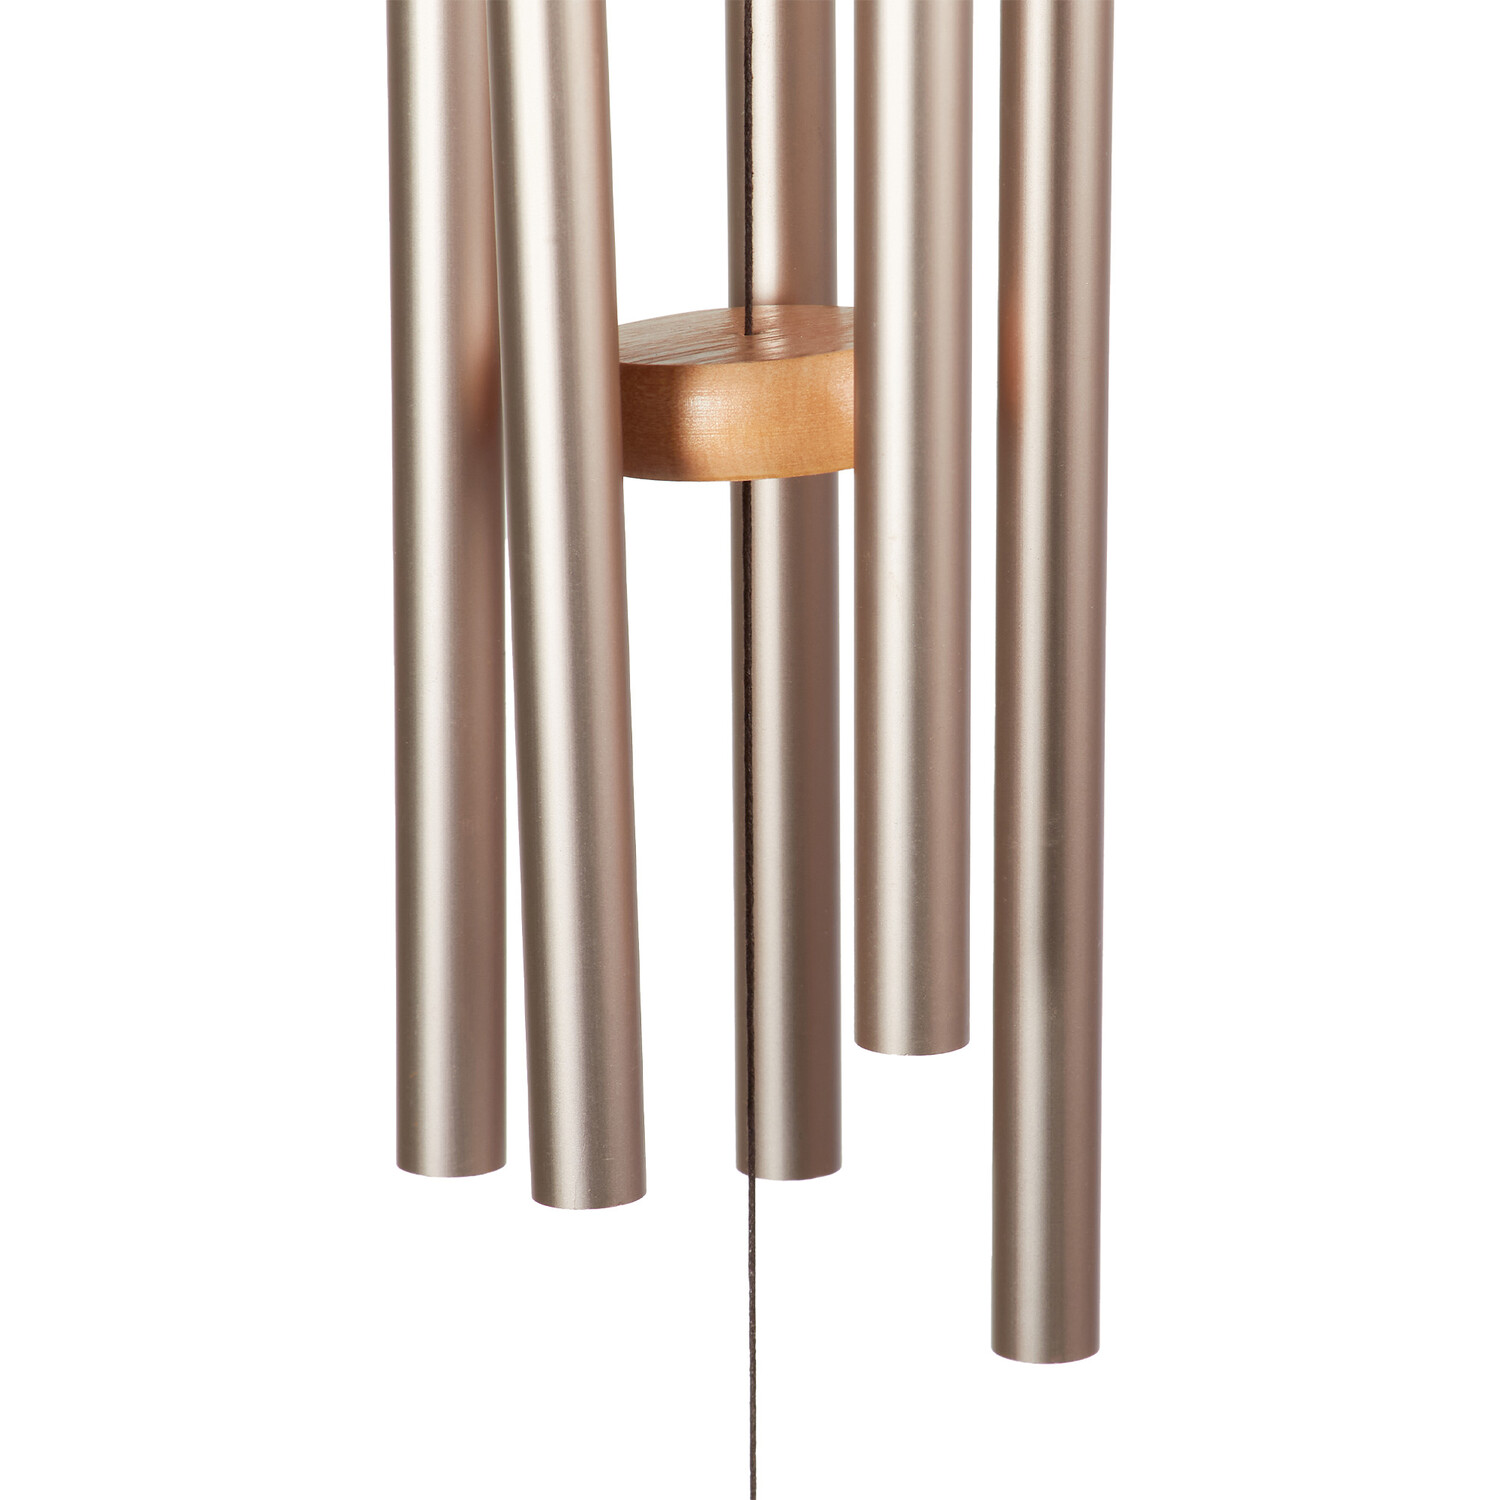 Wooden Windchime - Brown Image 2